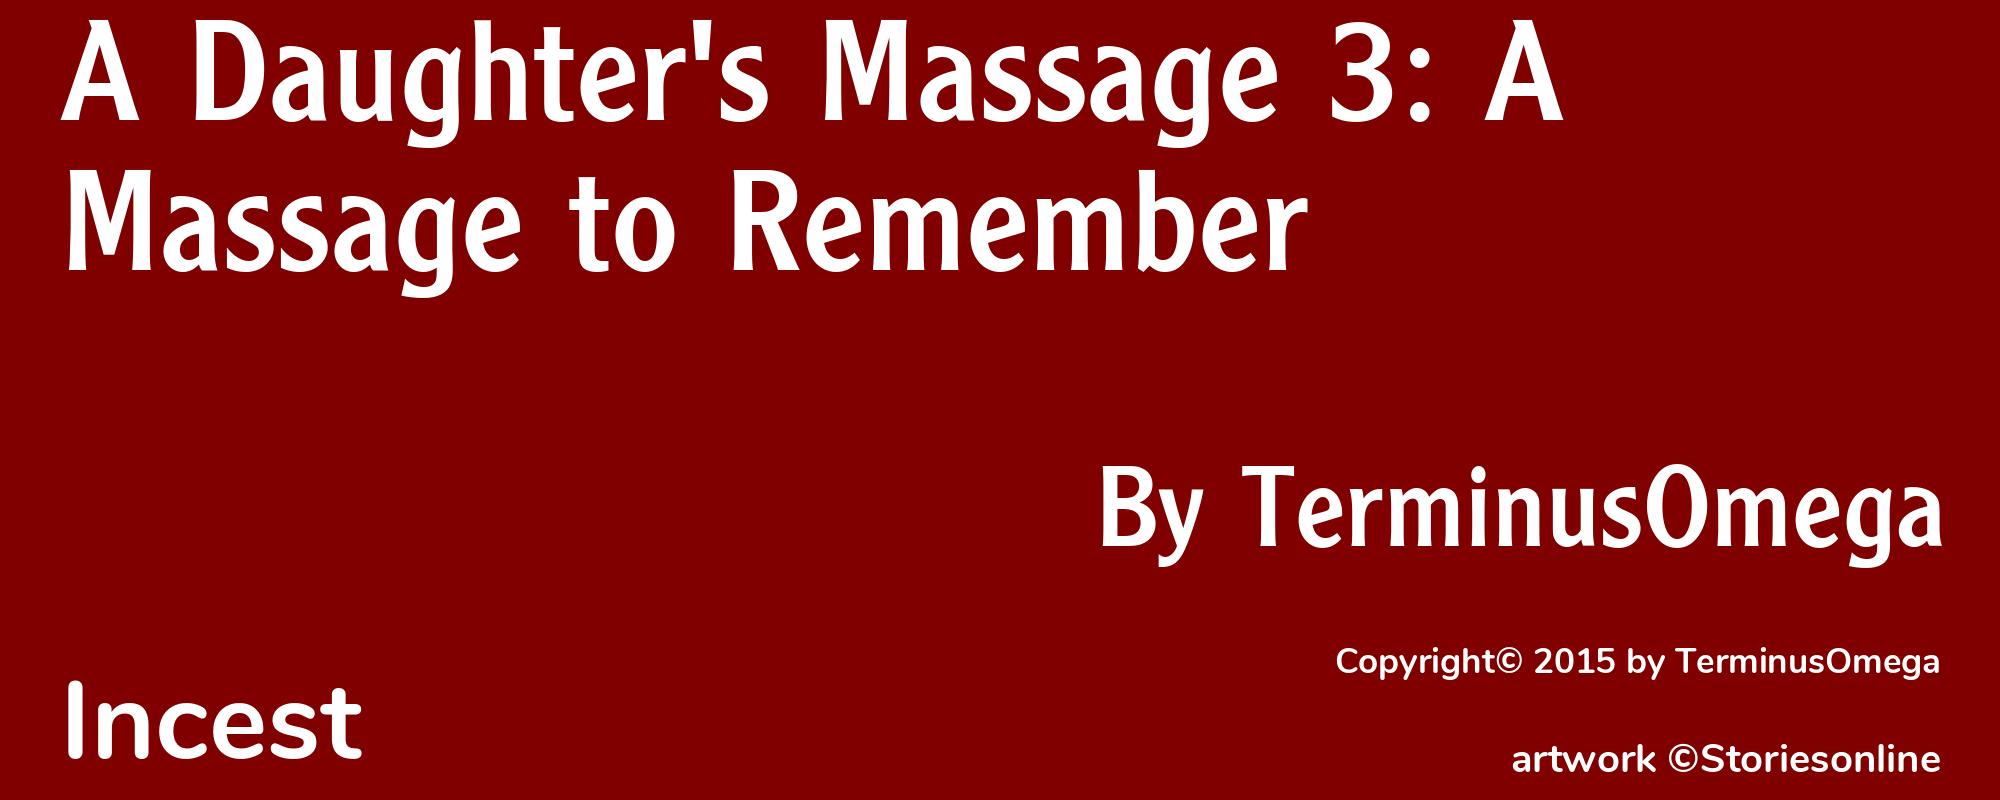 A Daughter's Massage 3: A Massage to Remember - Cover